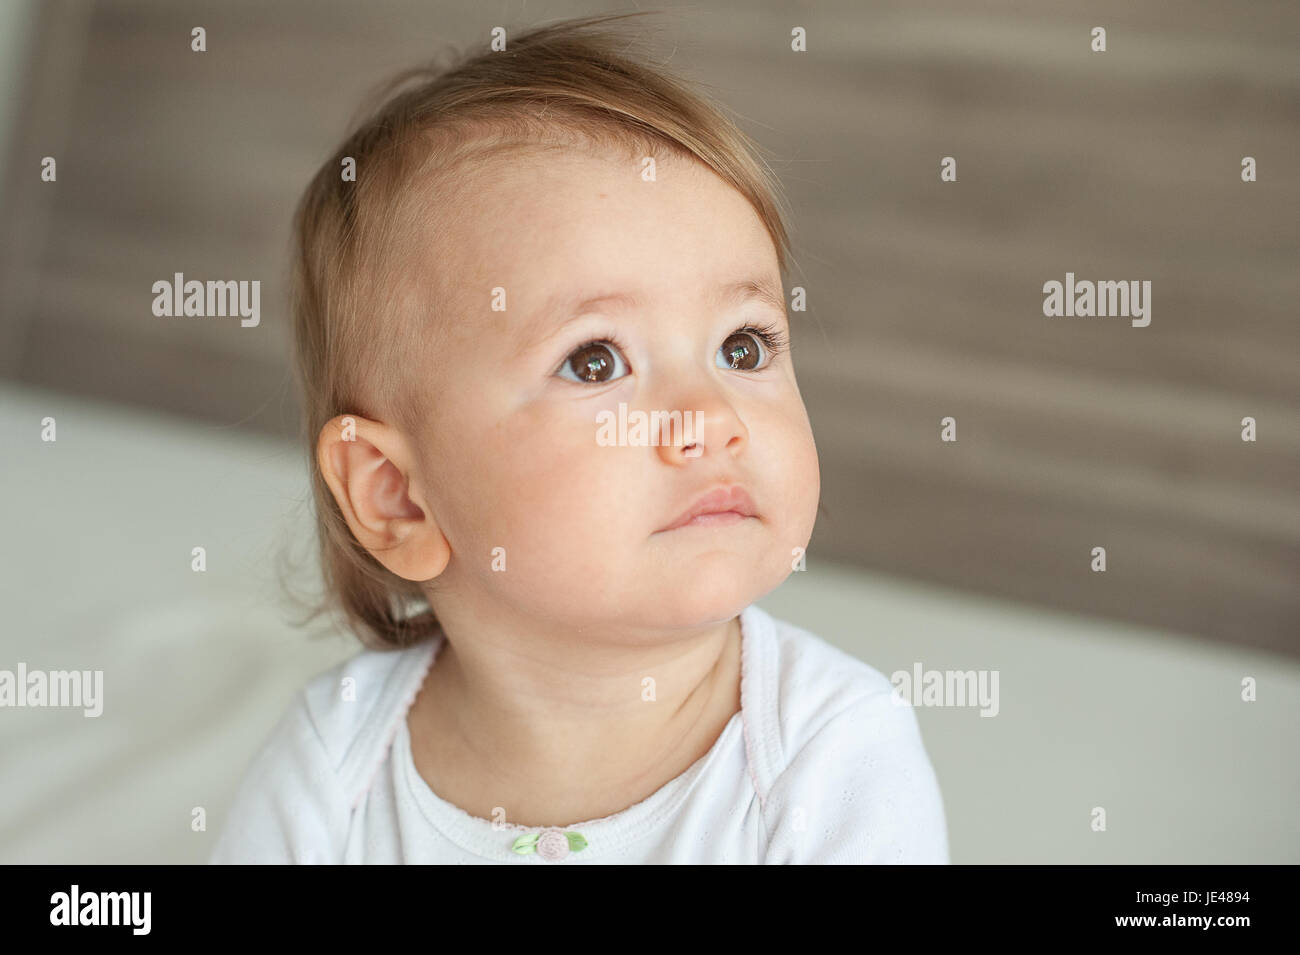 Friendly one year old baby feeling reflective Stock Photo